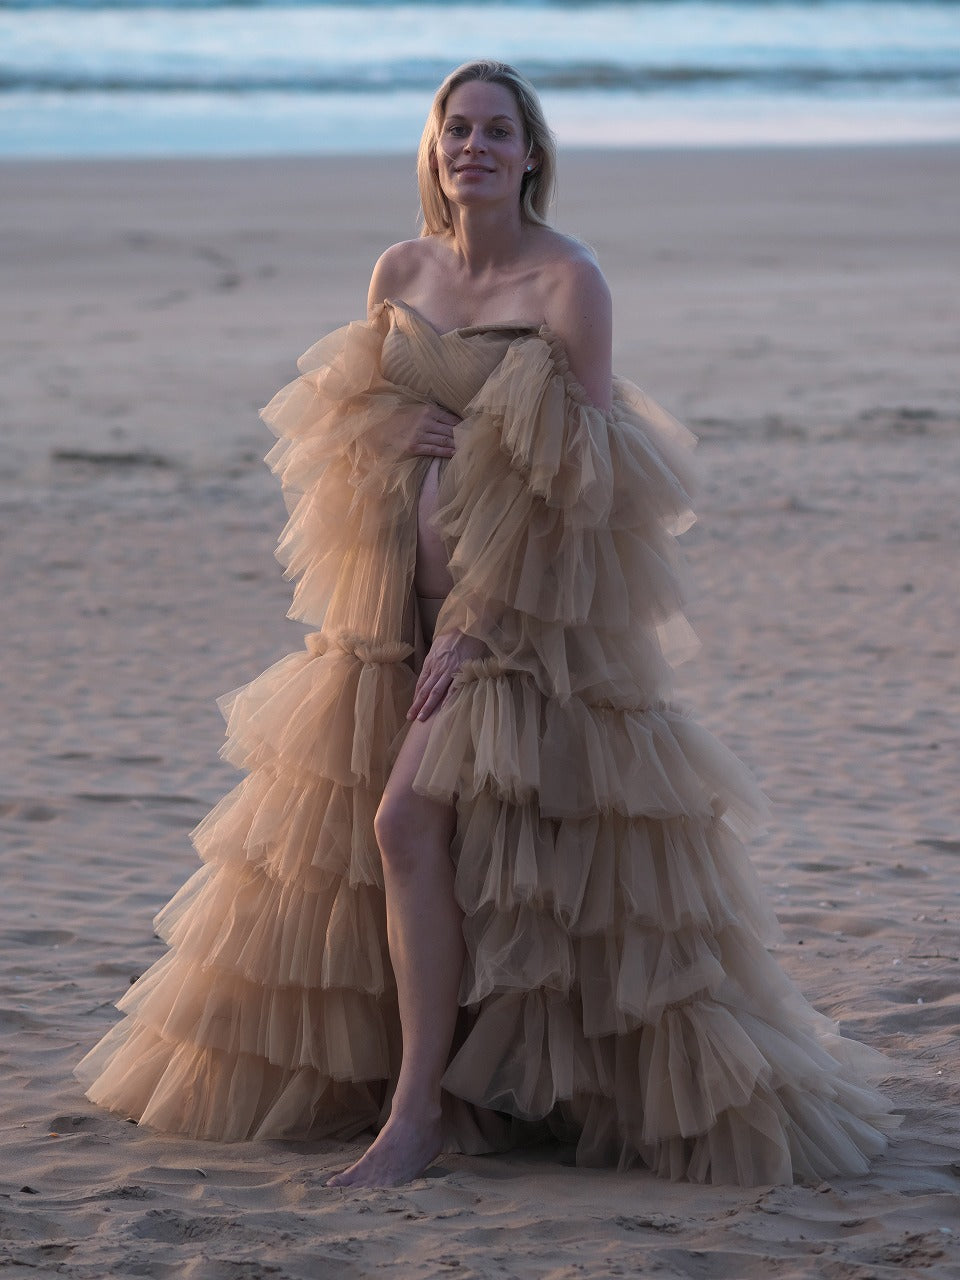 Photoshoot Dress Hire - Extra Puffy Tulle Dress – Luxe Bumps AU